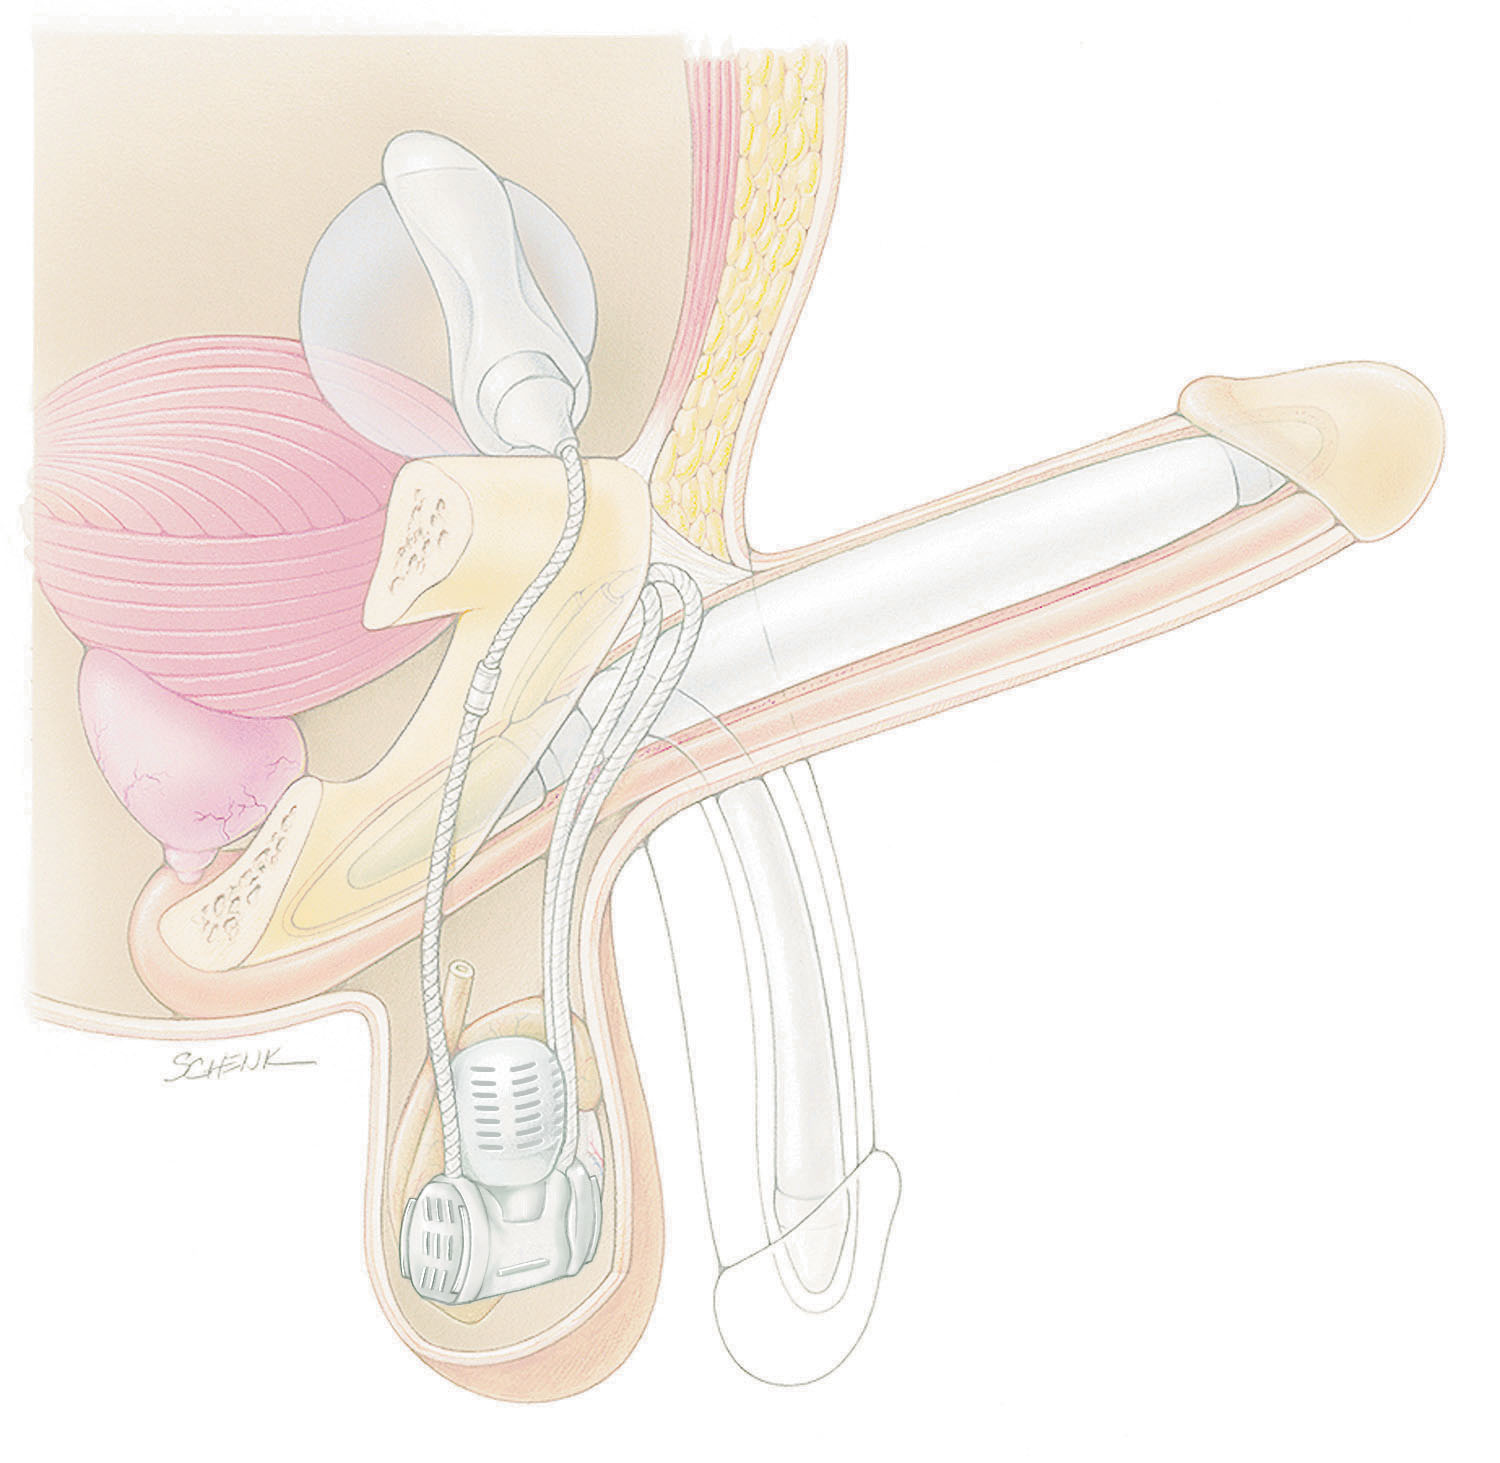 Other Types of Penile Implants by Dr. Garber